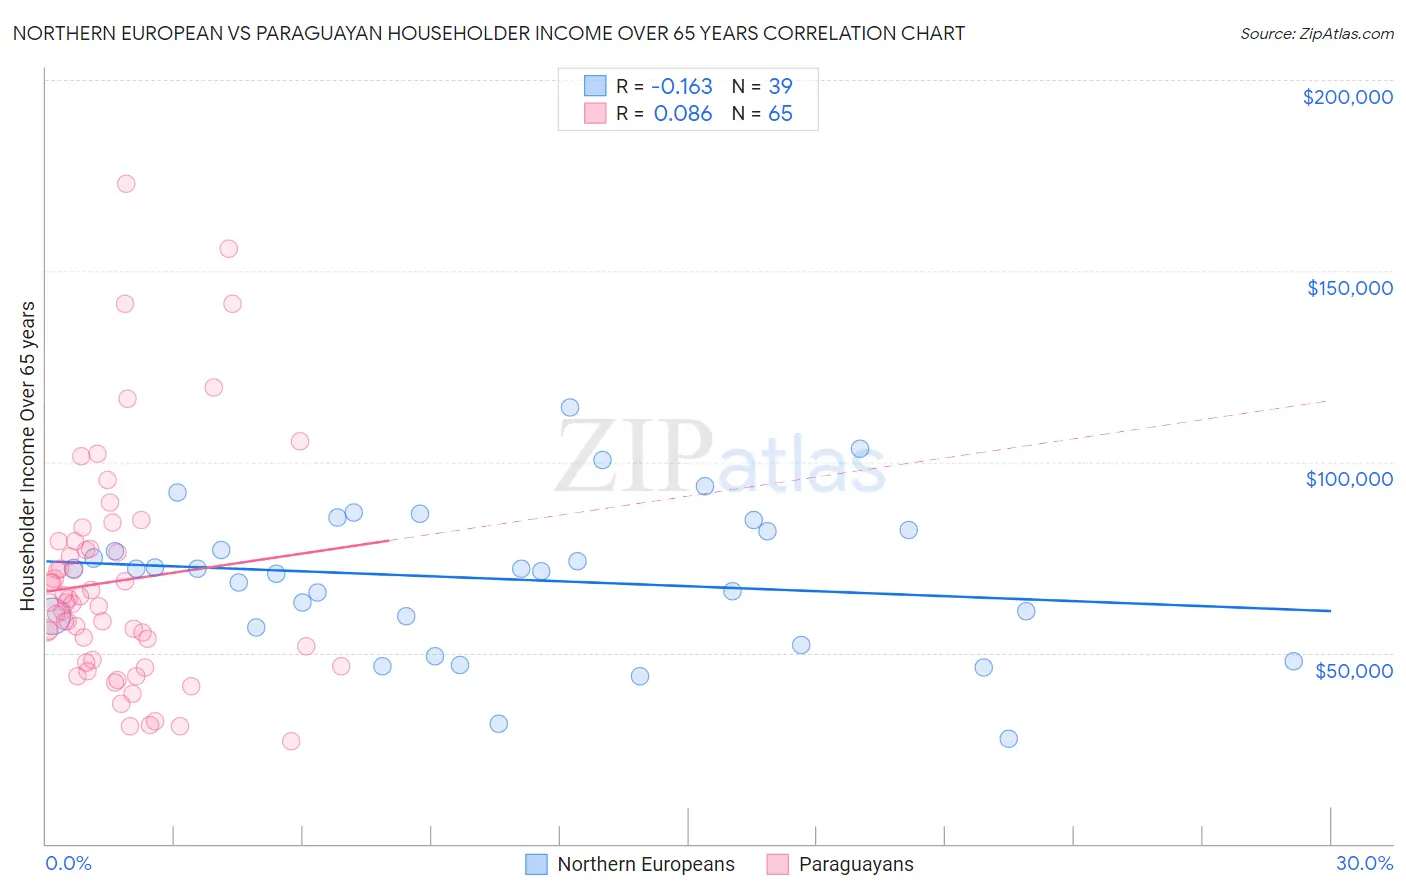 Northern European vs Paraguayan Householder Income Over 65 years